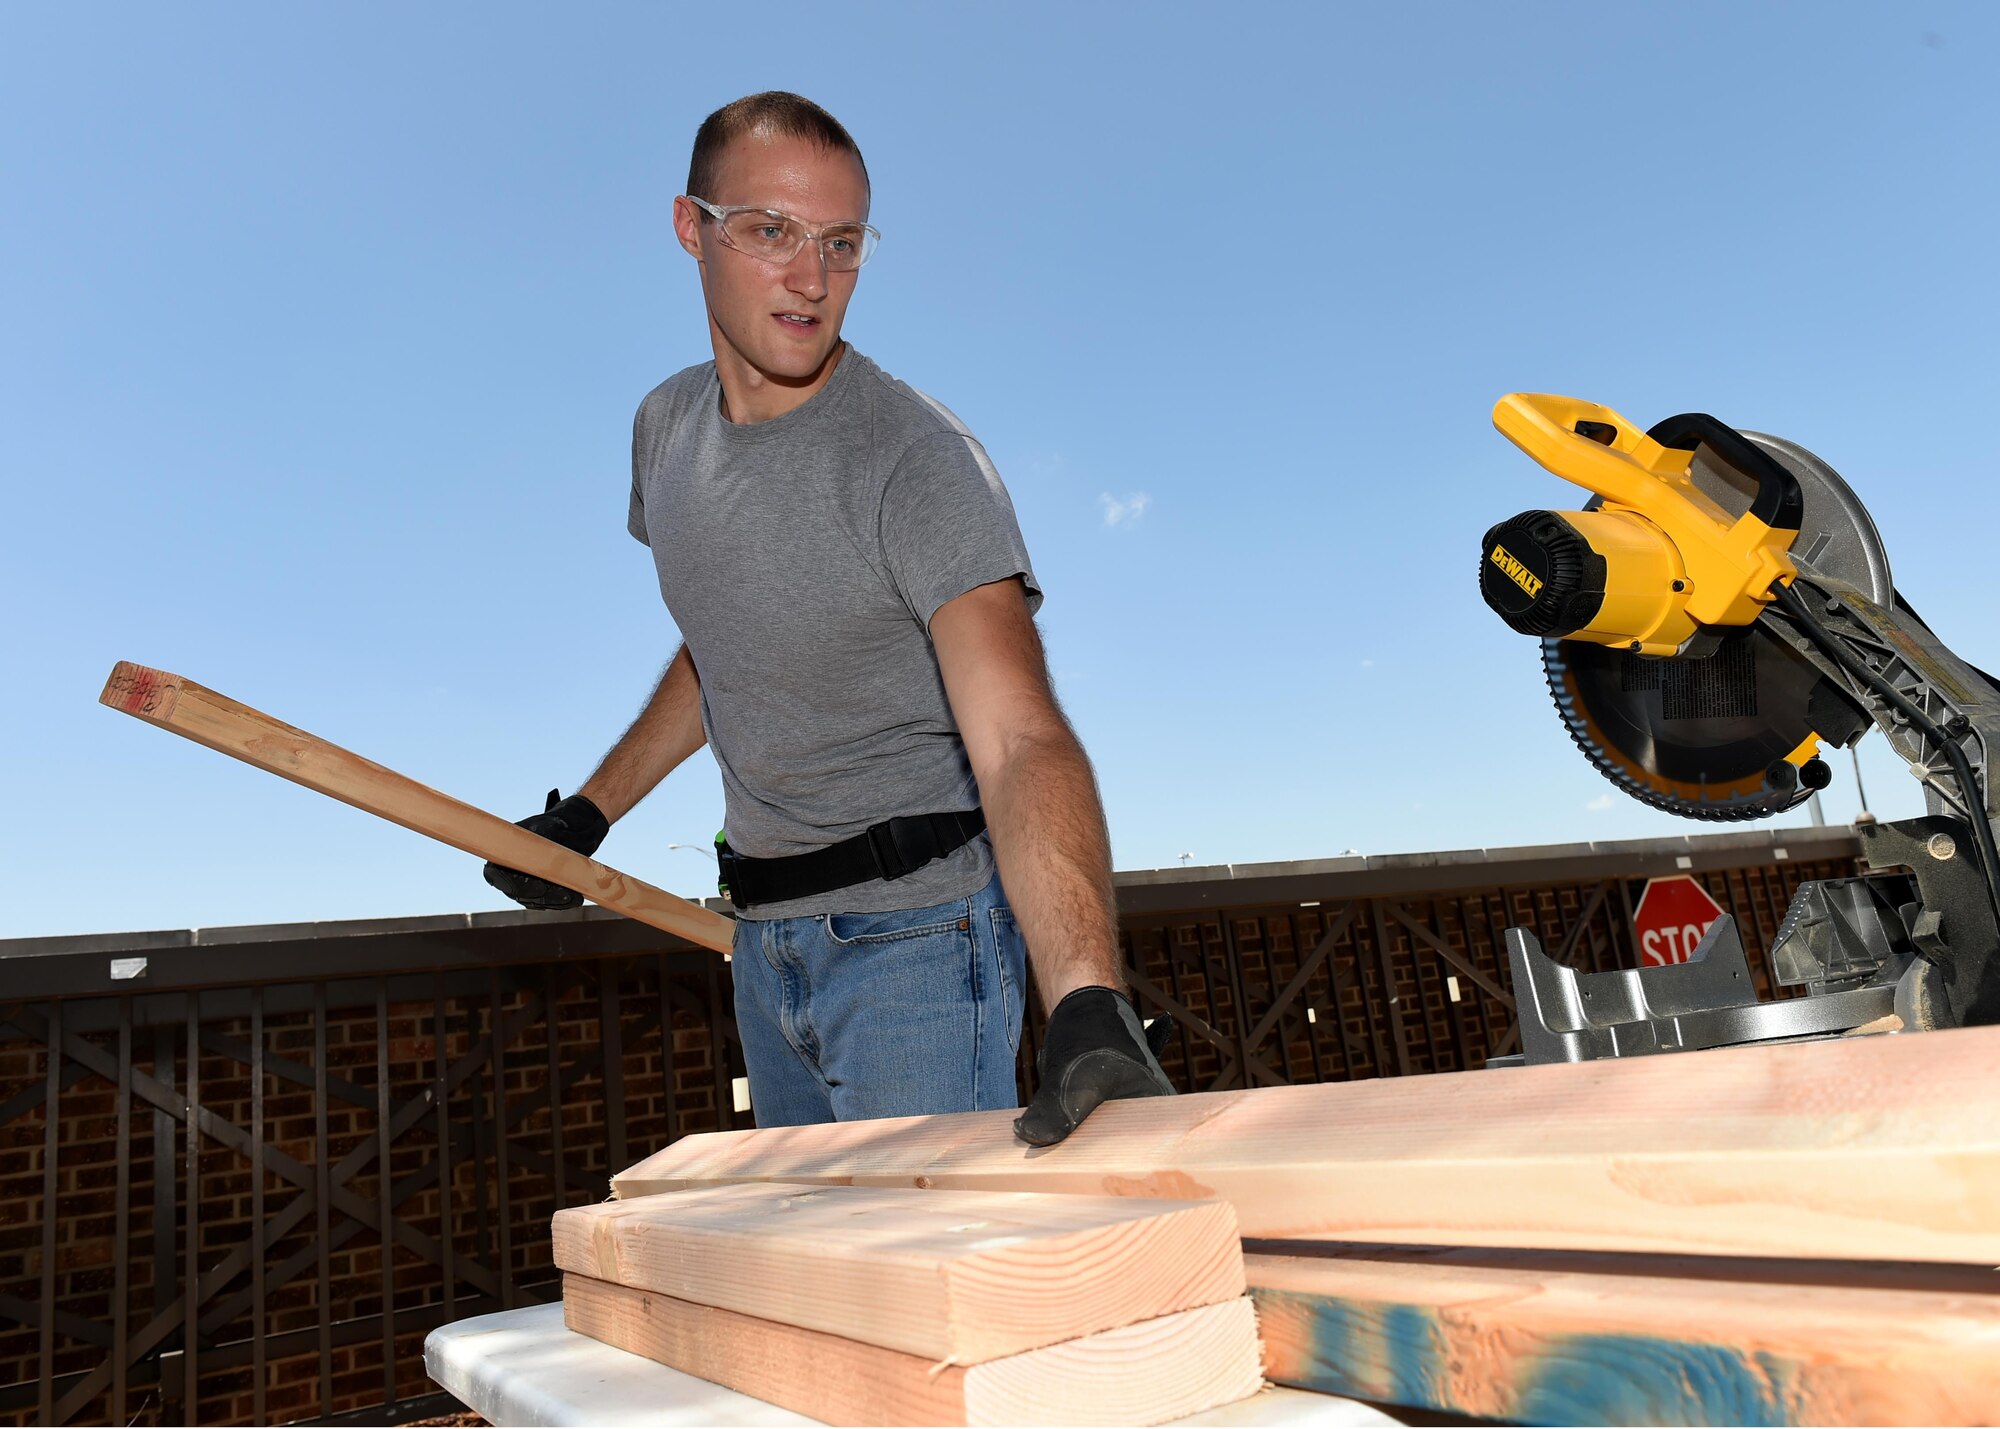 U.S. Air Force Airman 1st Class Jason Martin, 97th Security Forces Squadron response force member, cuts boards August 1, 2016, at Altus Air Force Base Okla. 97th SFS Airmen, led by Martin, took the initiative to remodel the main gate entry facility to improve efficiency and aesthetics. (U.S. Air Force photo by Airman 1st Class Kirby Turbak/Released)